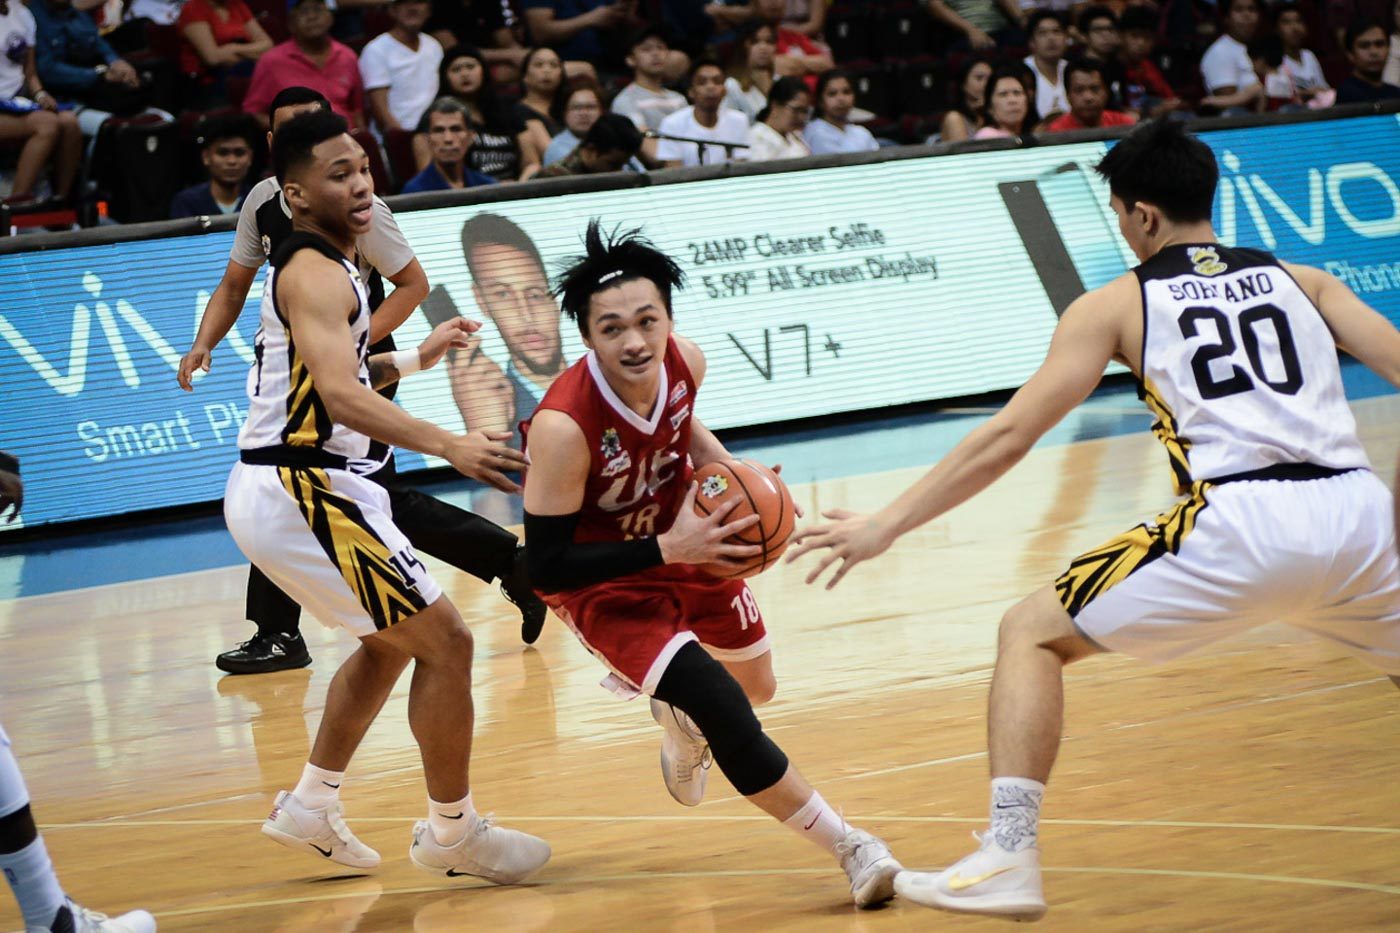 After near upset of DLSU, the UE Red Warriors walk with a winning swagger